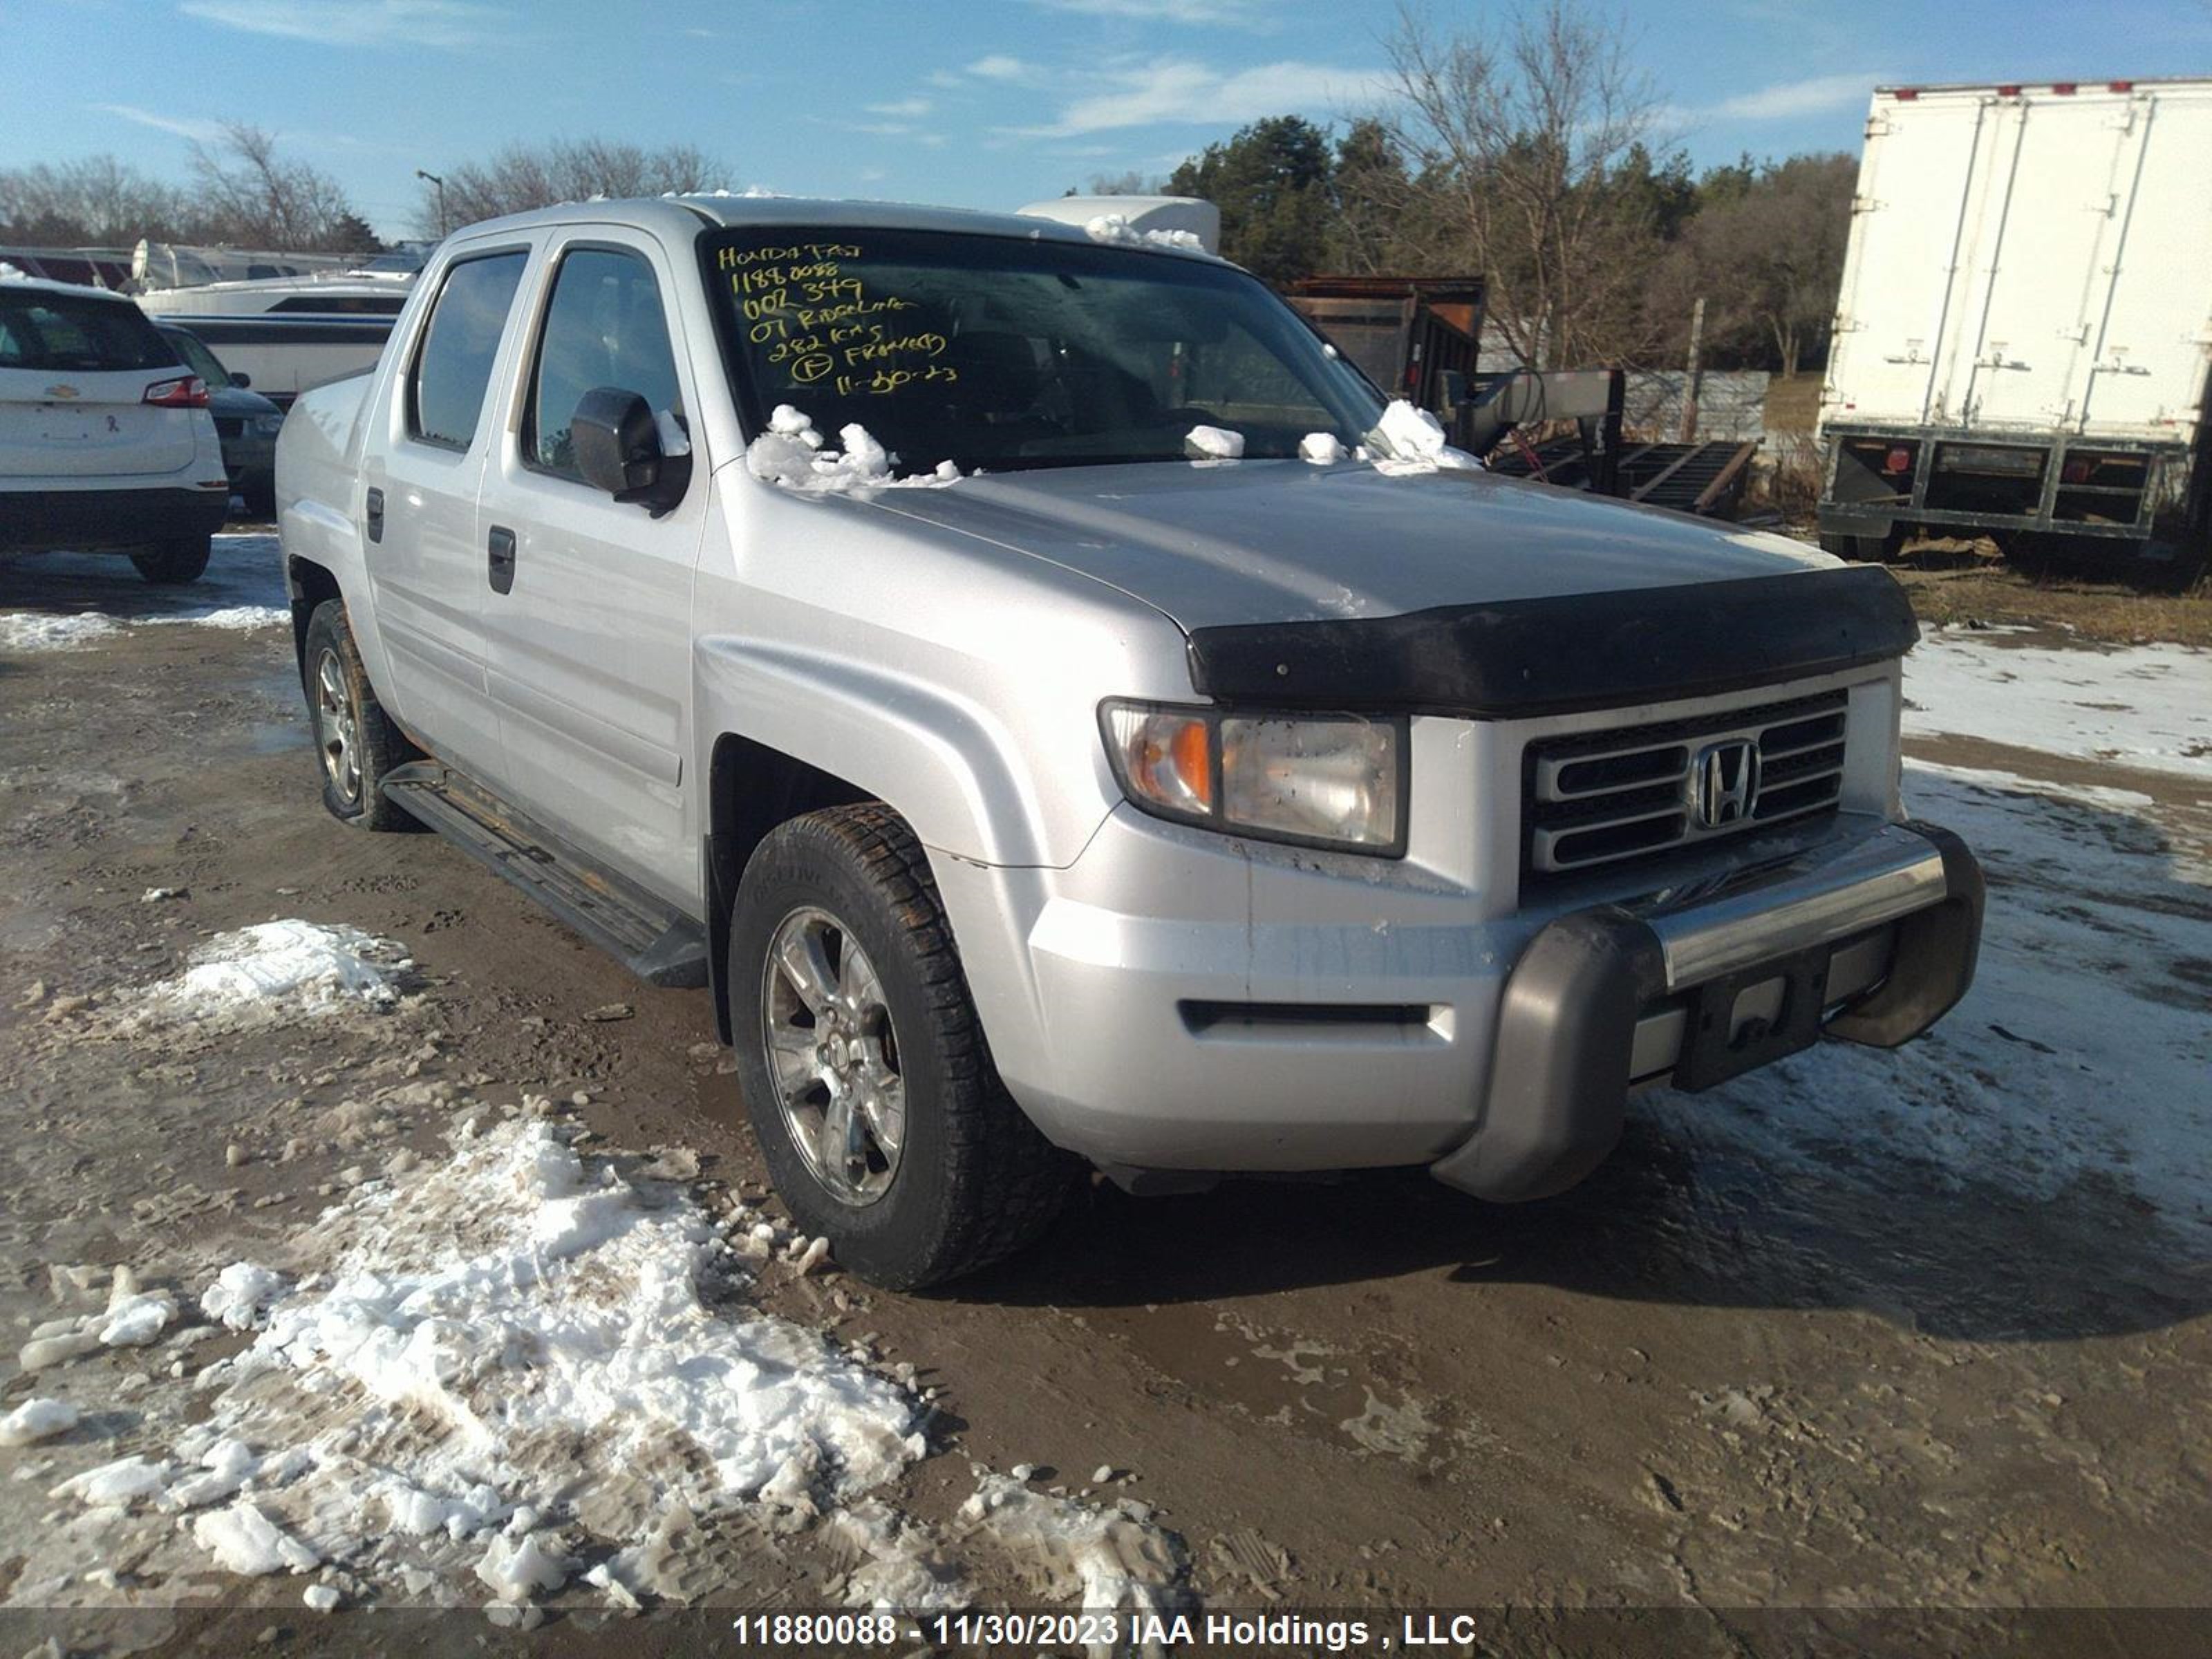 vin: 2HJYK16487H002349 2HJYK16487H002349 2007 honda ridgeline 3500 for Sale in l4a7x4, 16505 Hwy 48 , Stouffville, Ontario, USA